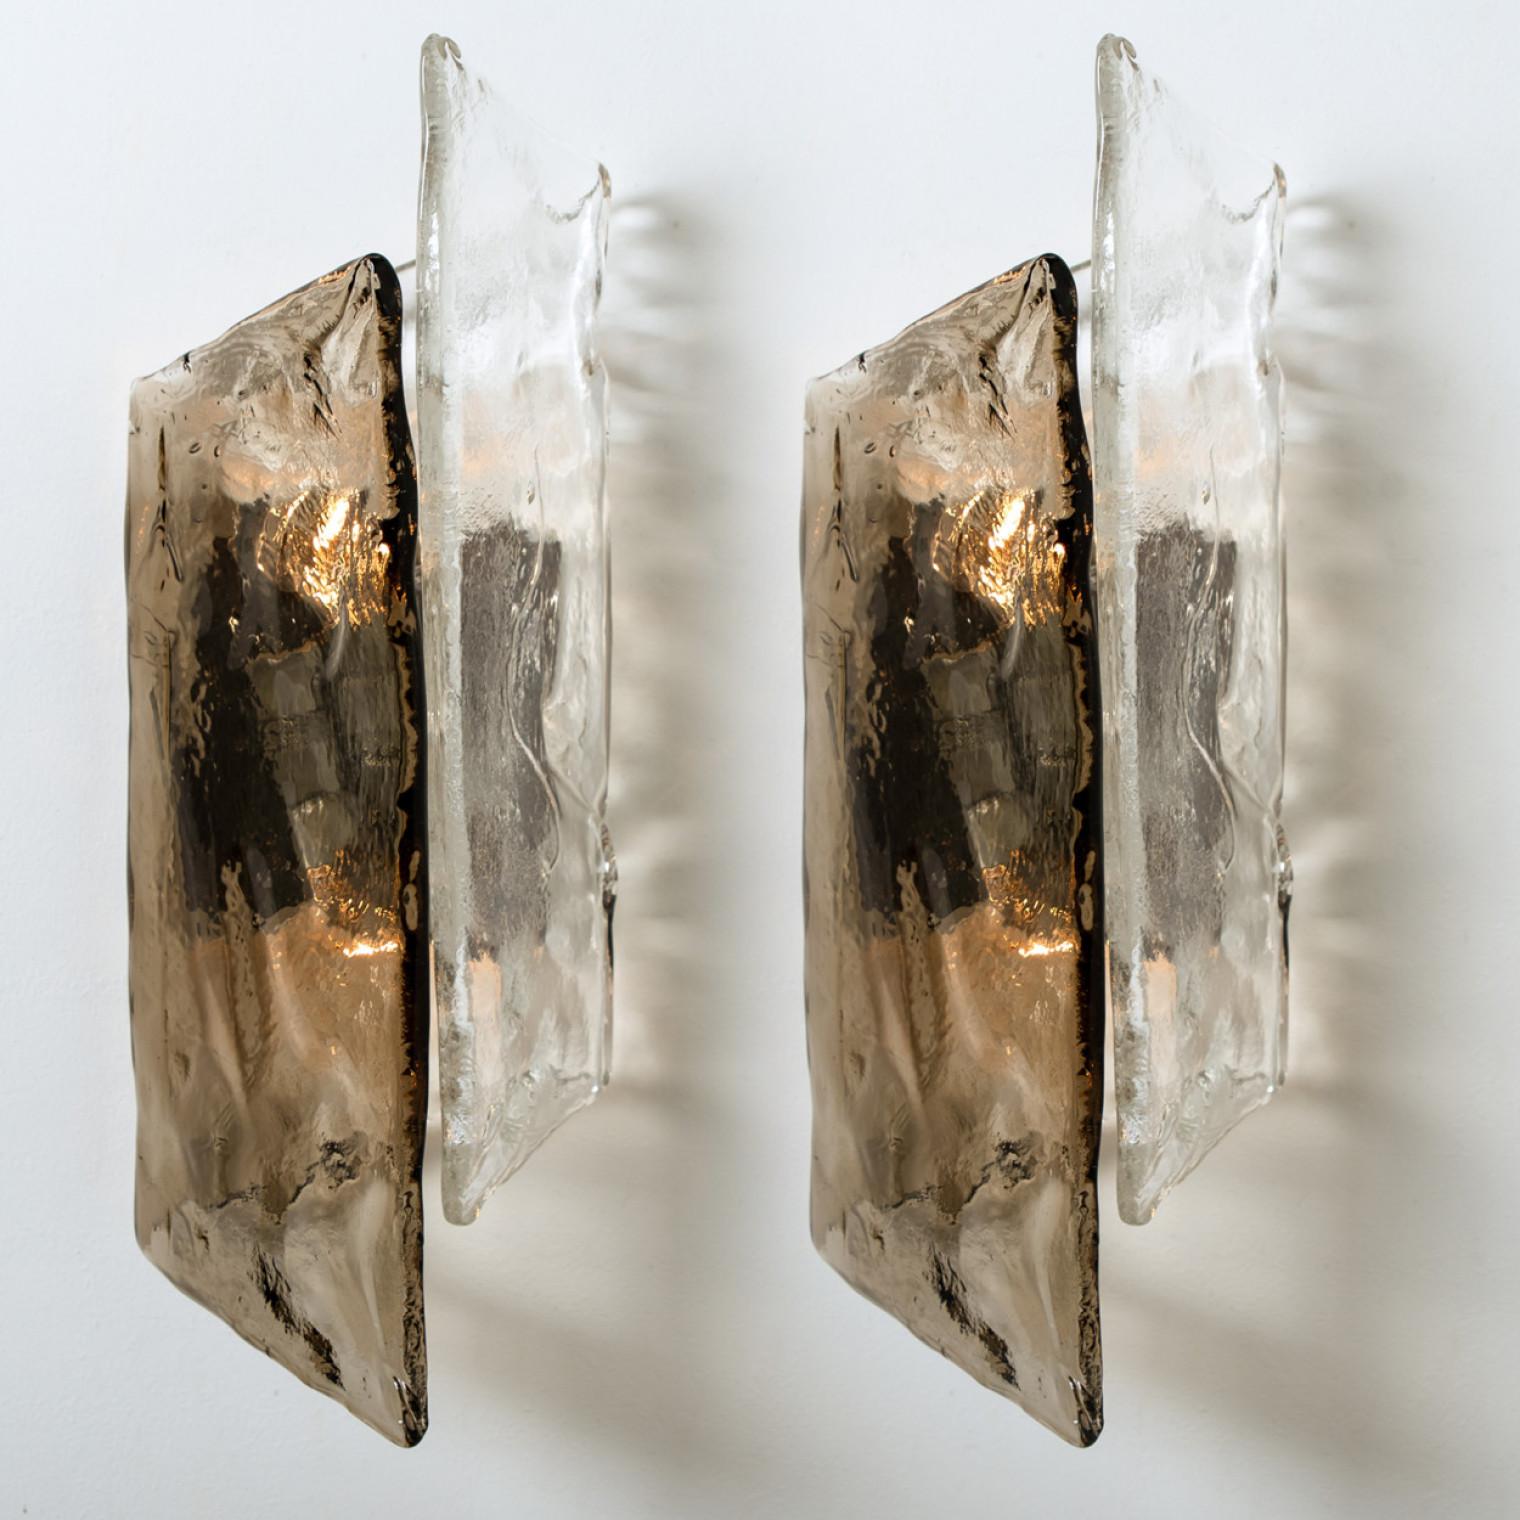 Beautiful and large murano glass wall sconces or lights by Carlo Nason, Austria, 1970s. A white lacquered metal backplate holds and hand blown and smoked bubble glass shades. Each Wall light takes two small base bulbs up to max. 40W per